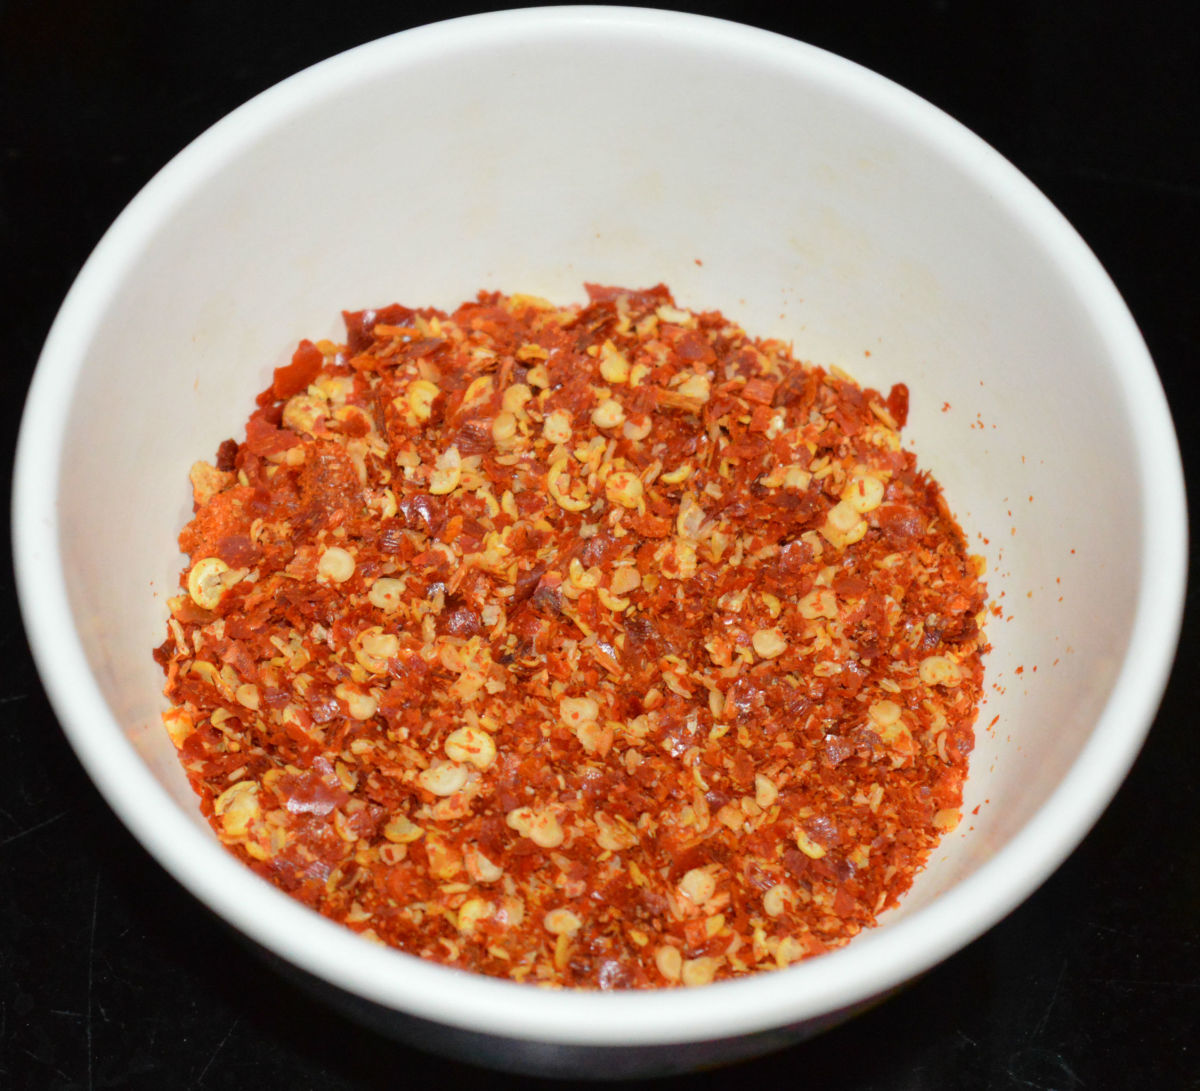 How to Make Chili Flakes at Home